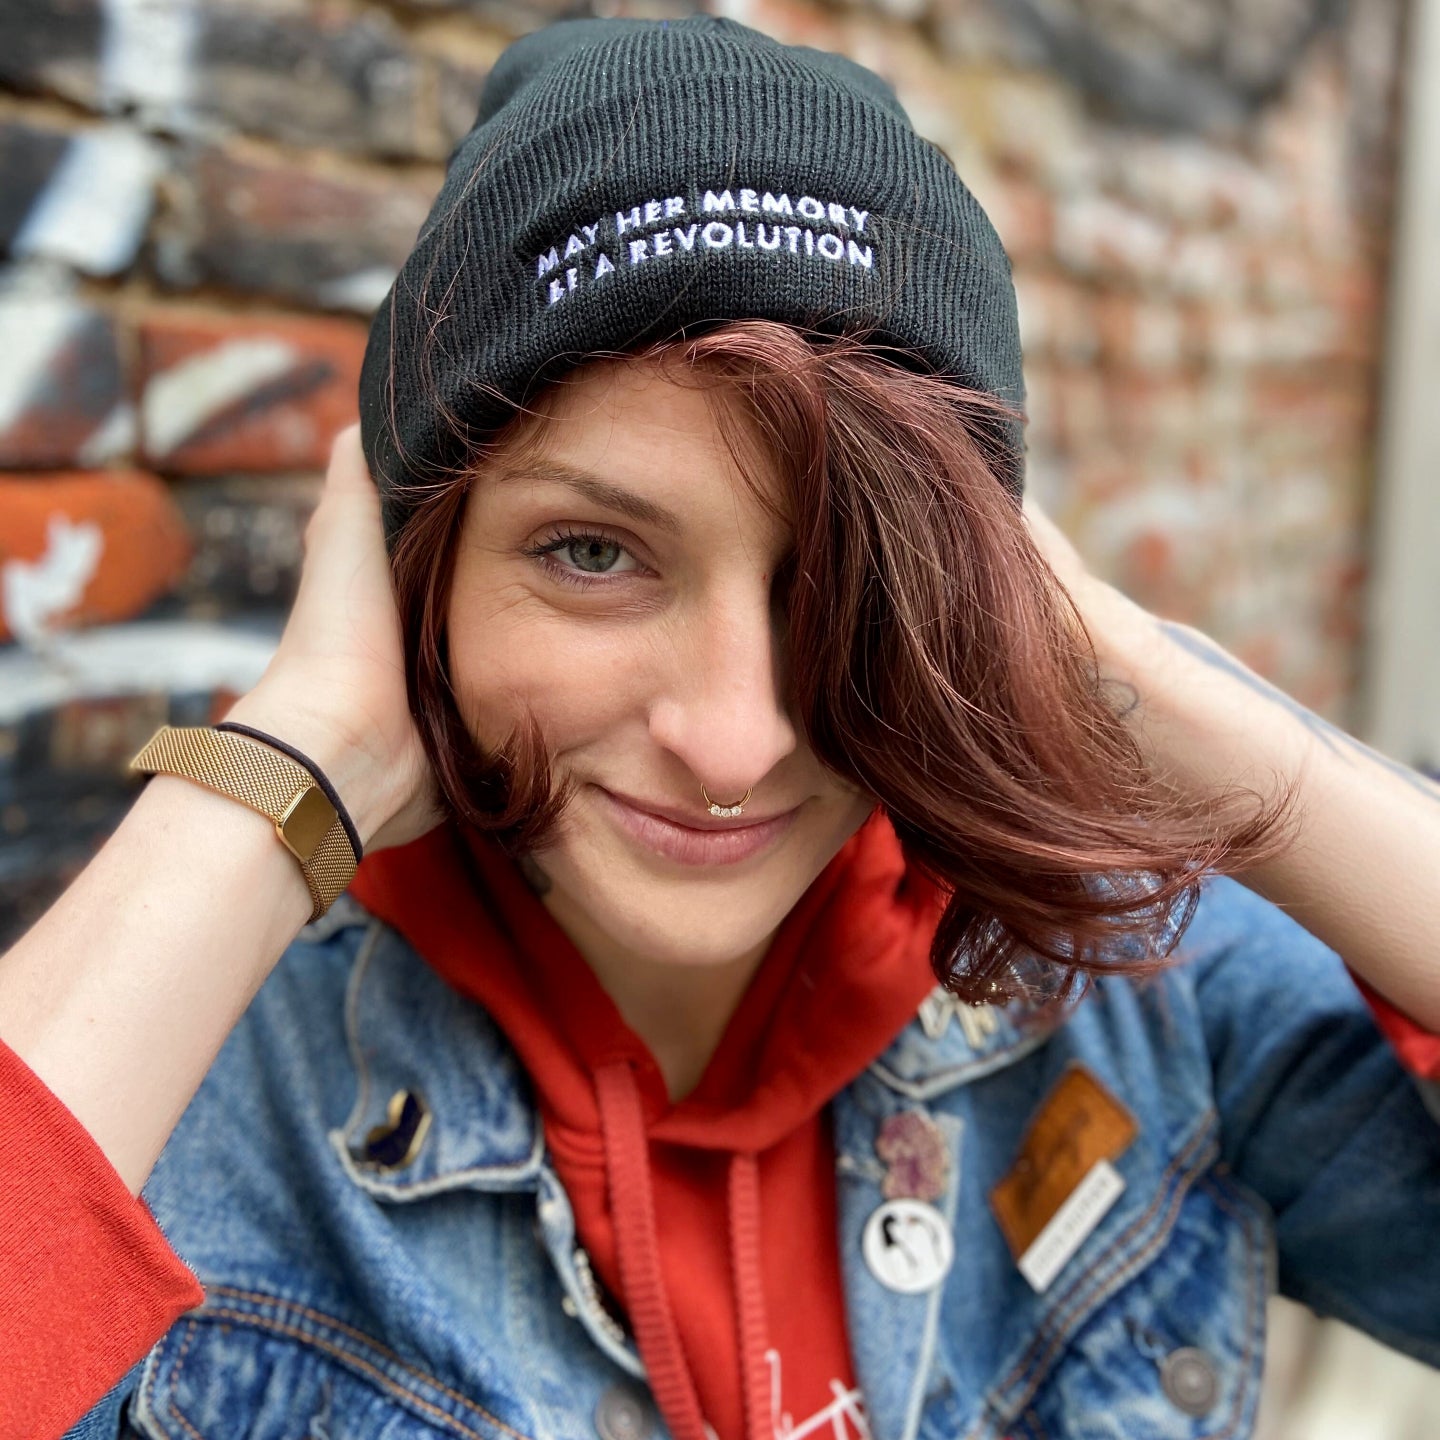 May Her Memory Be A Revolution Beanie